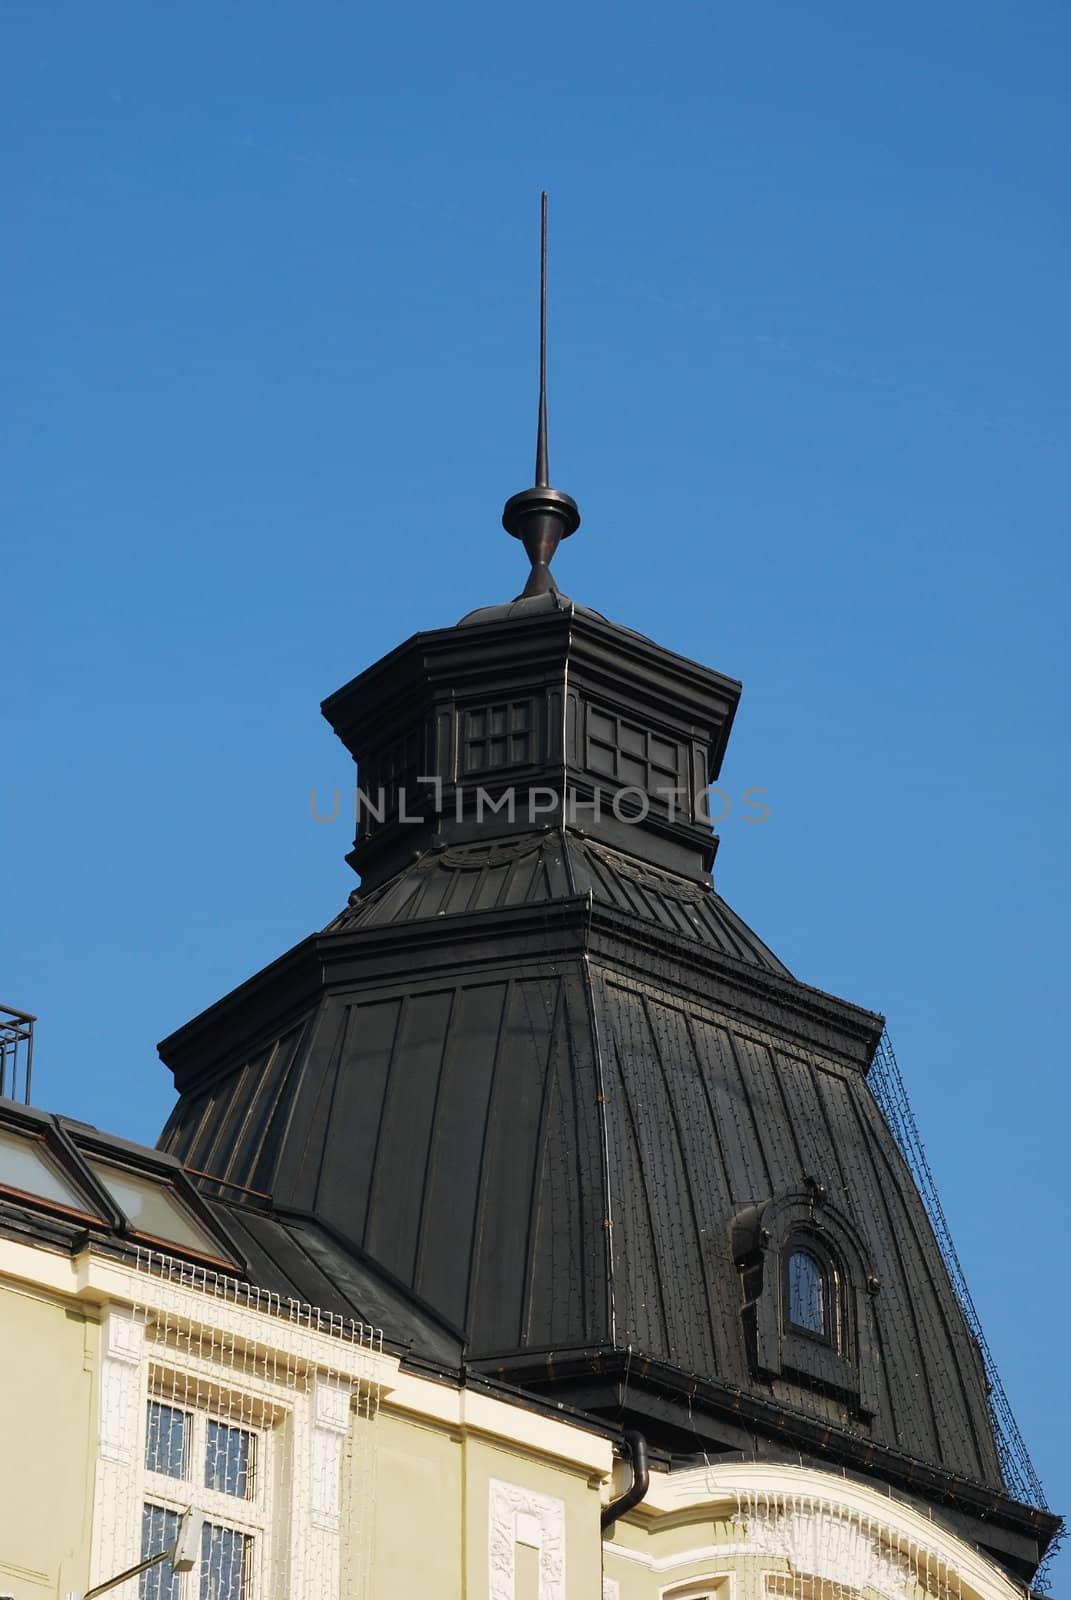 Top of 19th century European building details and close-ups